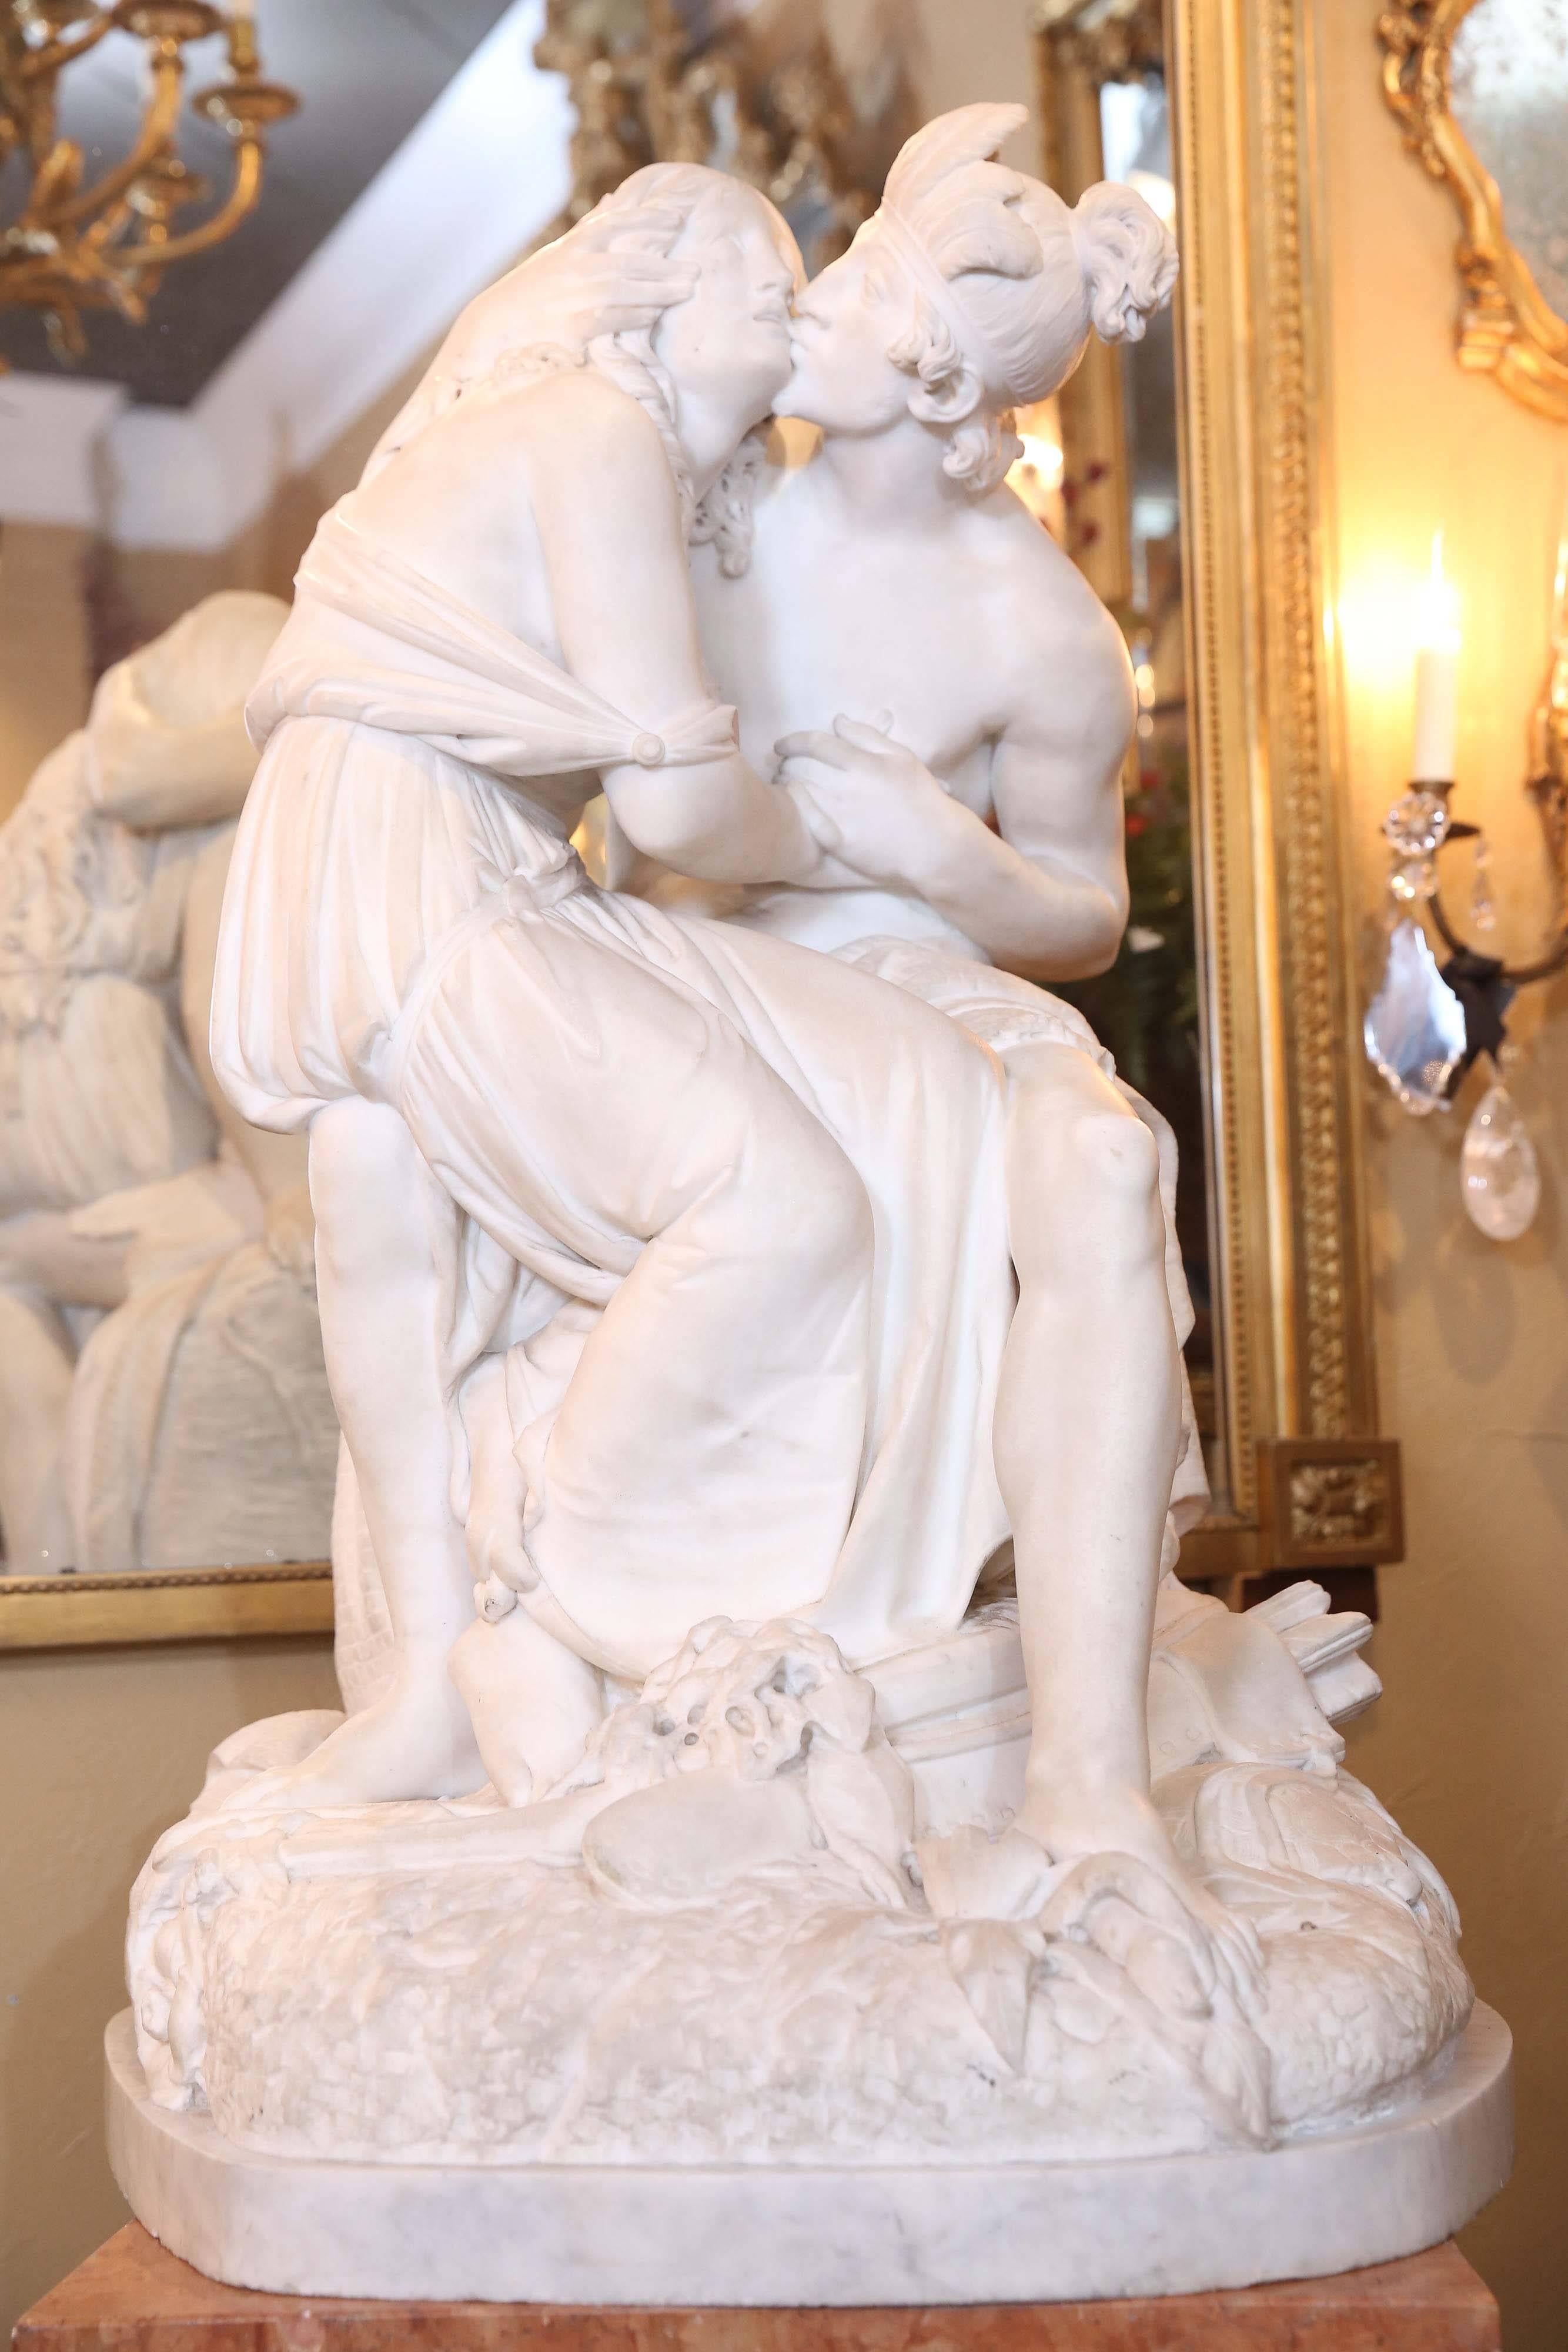 Large-Scale Marble Sculpture of Two Figures Embracing by the Sculptor Turini 2